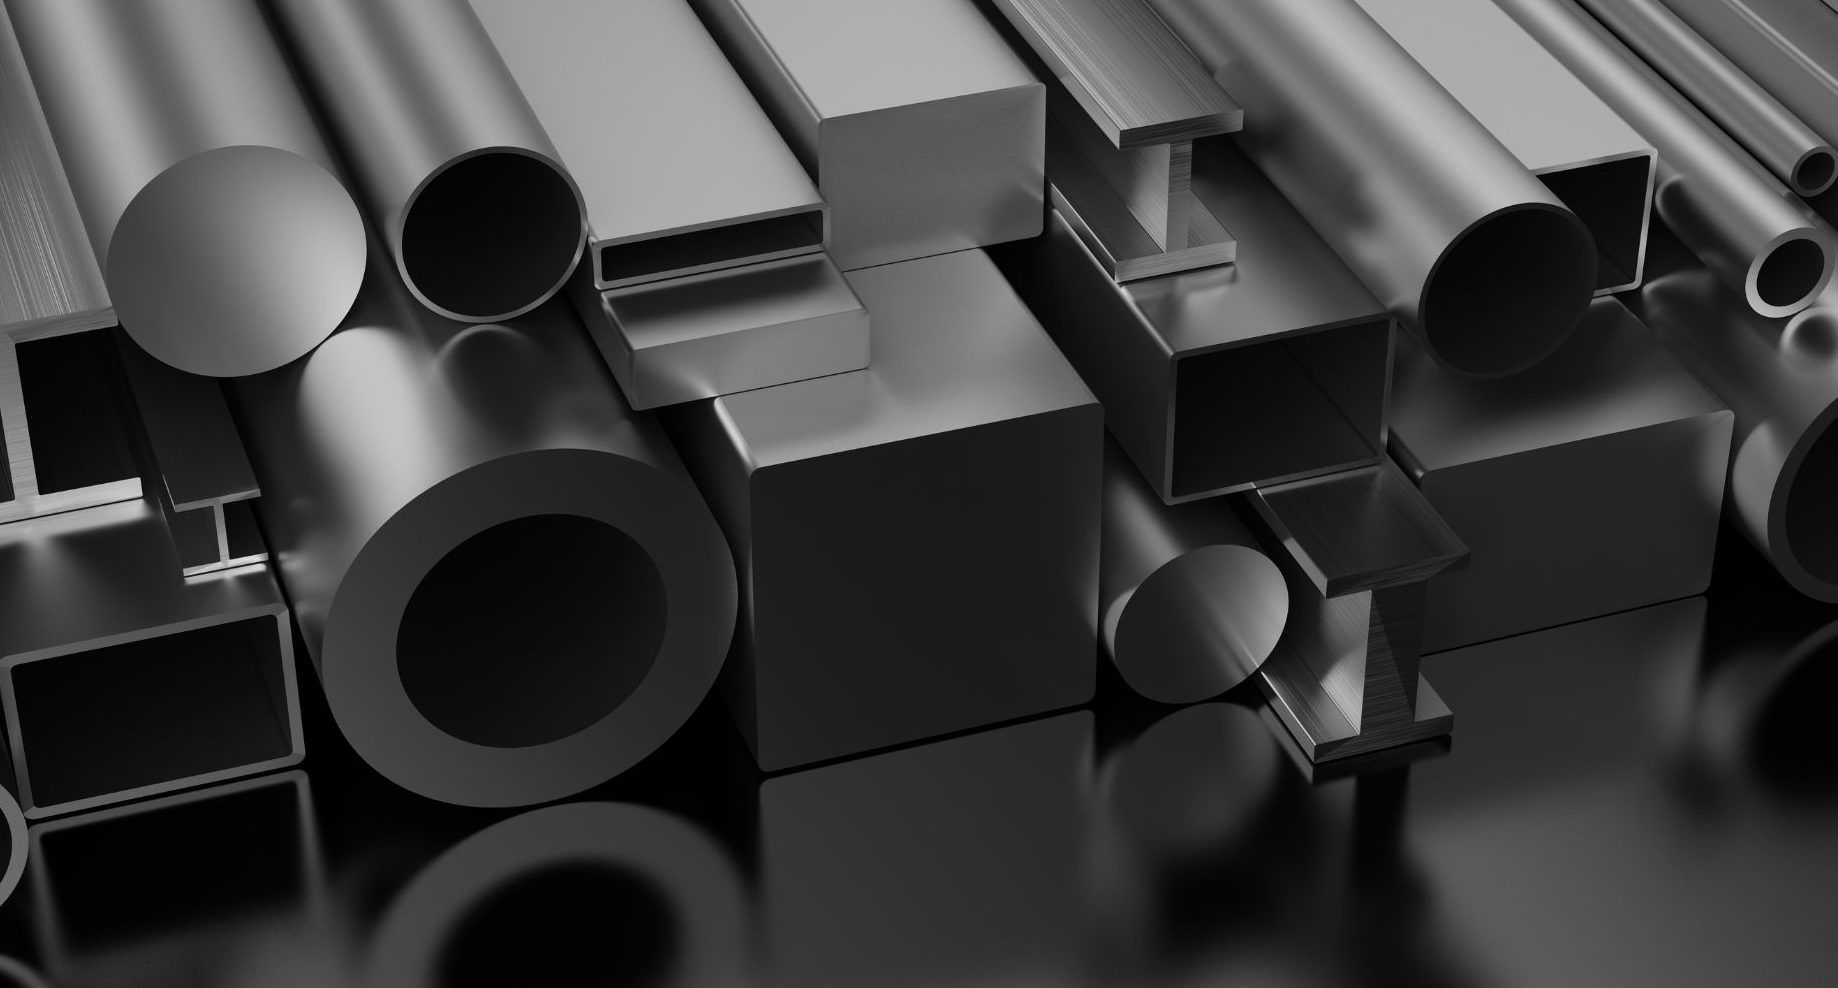 Take Up Global Steel Products Market Opportunities With Clear Industry Data – Includes Steel Products Market Growth